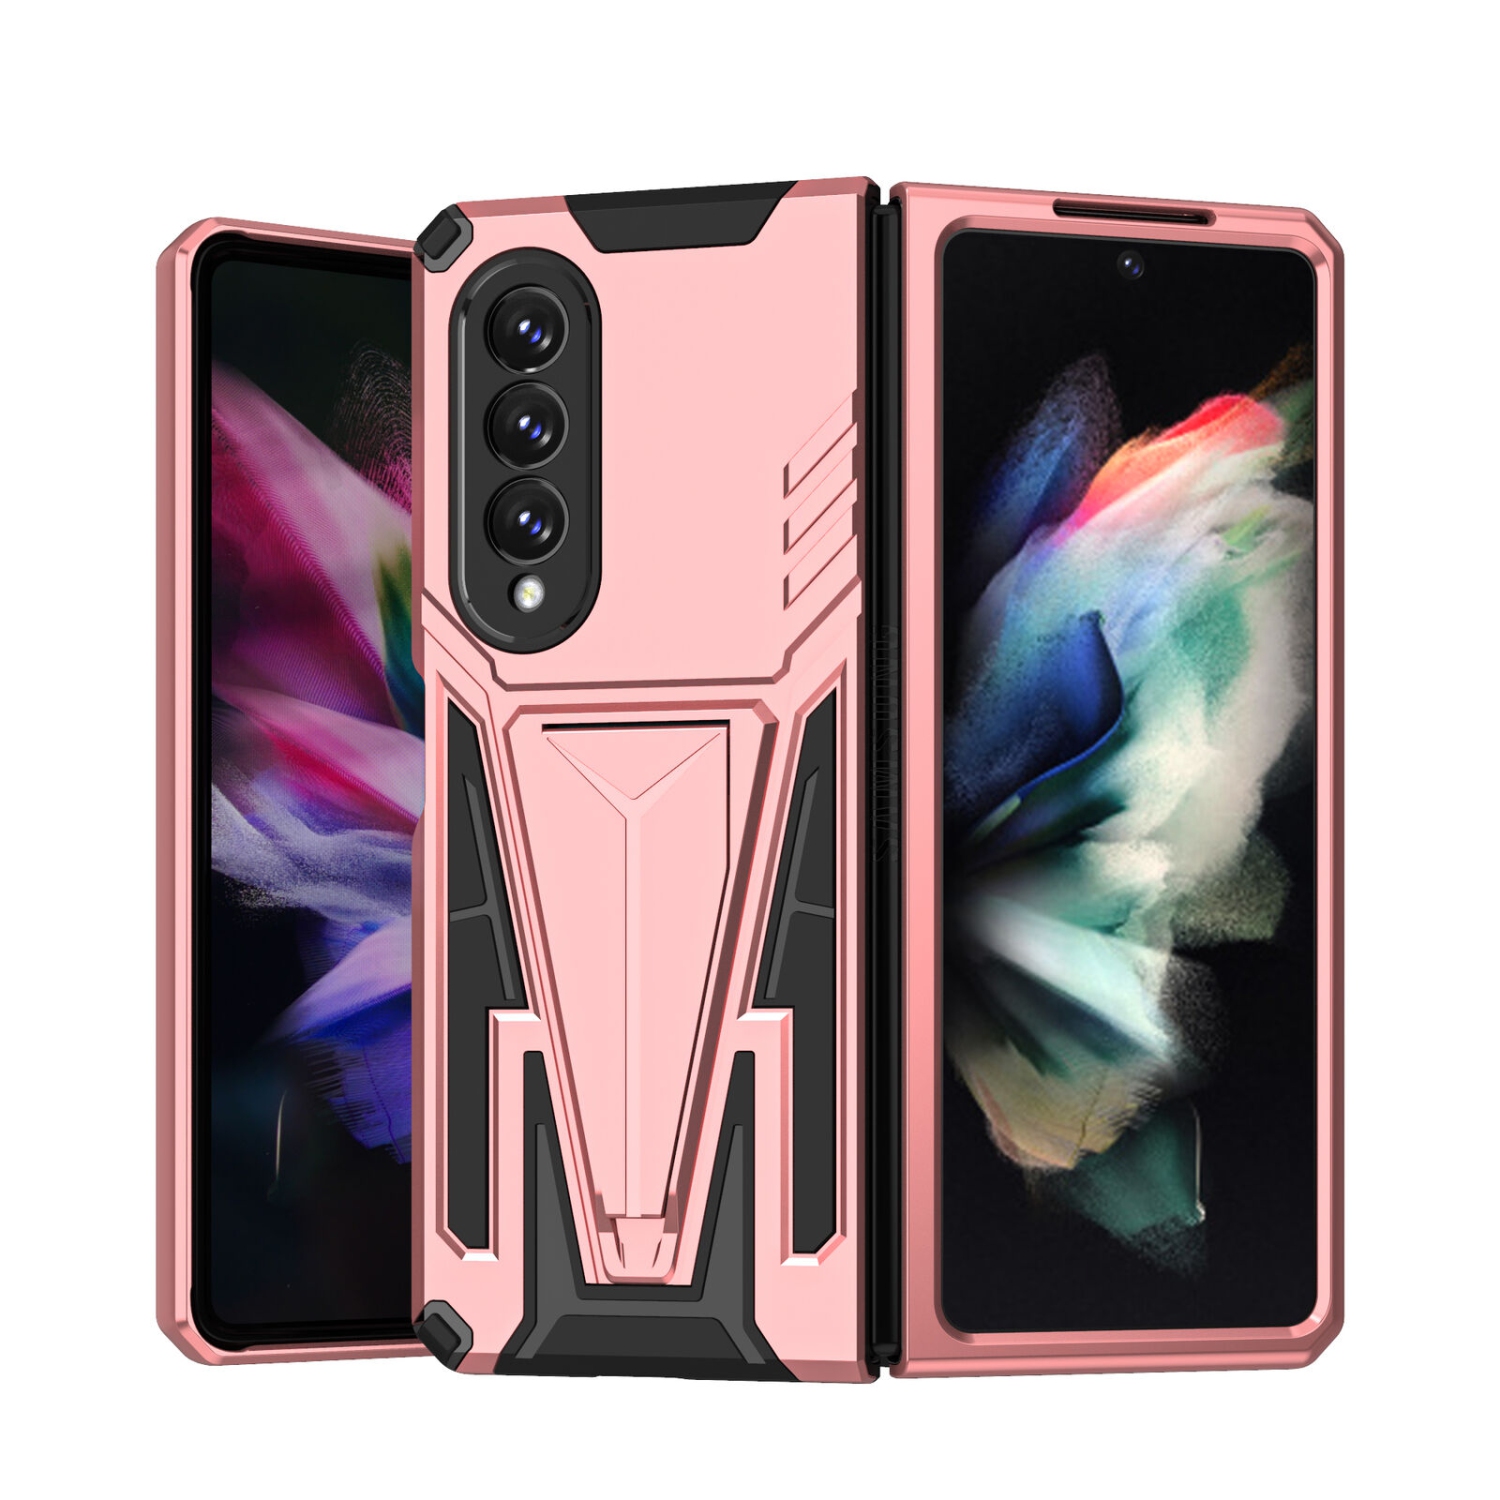 【CSmart】 Shockproof Heavy Duty Rugged Defender Case Kickstand Cover for Samsung Galaxy Z Fold 3 5G, Rose Gold